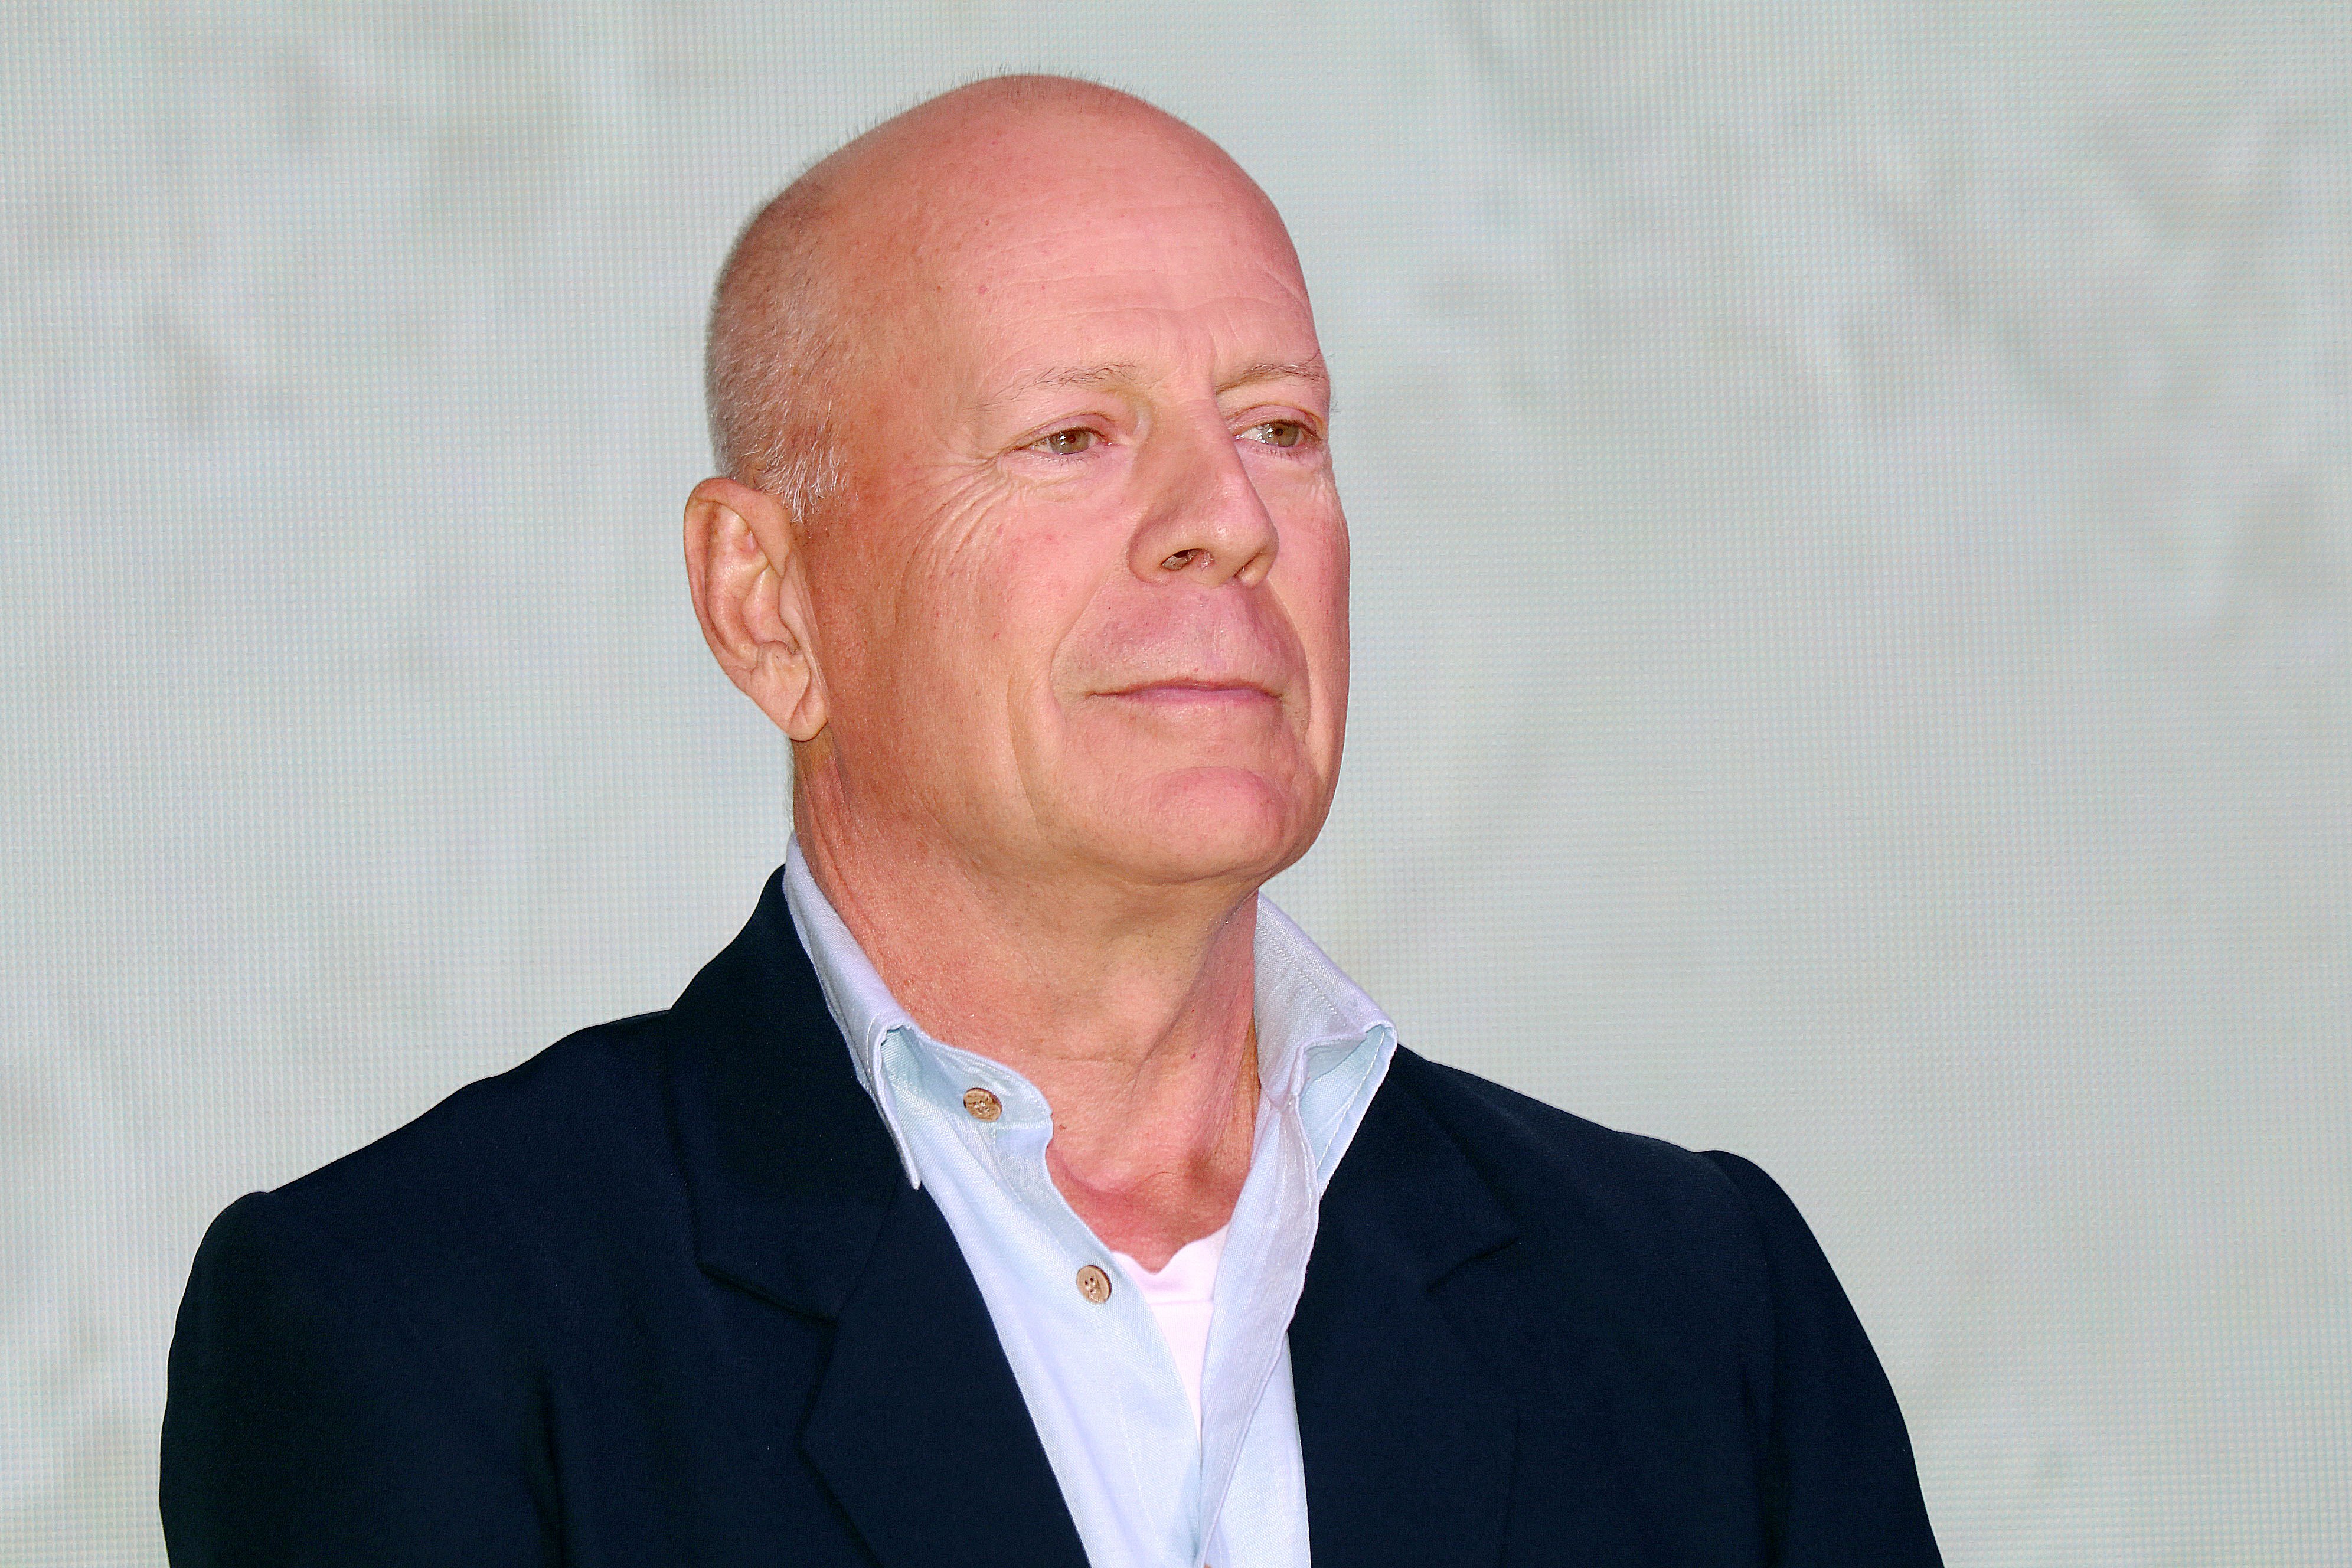 Bruce Willis at the CocoBaba and Ushopal activity on November 4, 2019, in Shanghai, China | Source: Getty Images